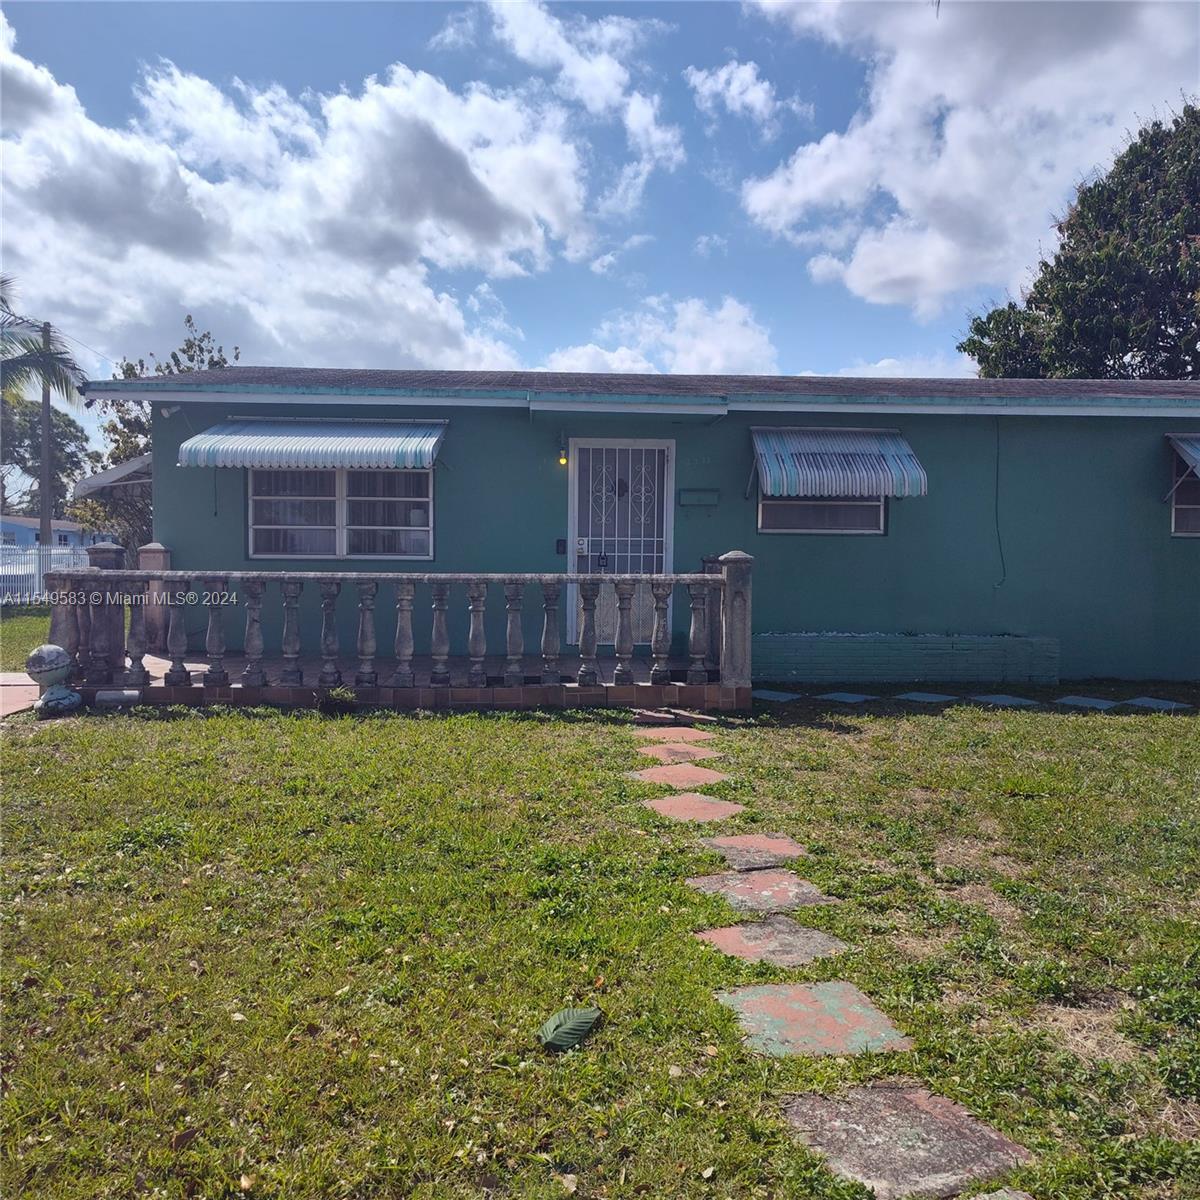 Photo of 2971 NW 166th St in Miami Gardens, FL